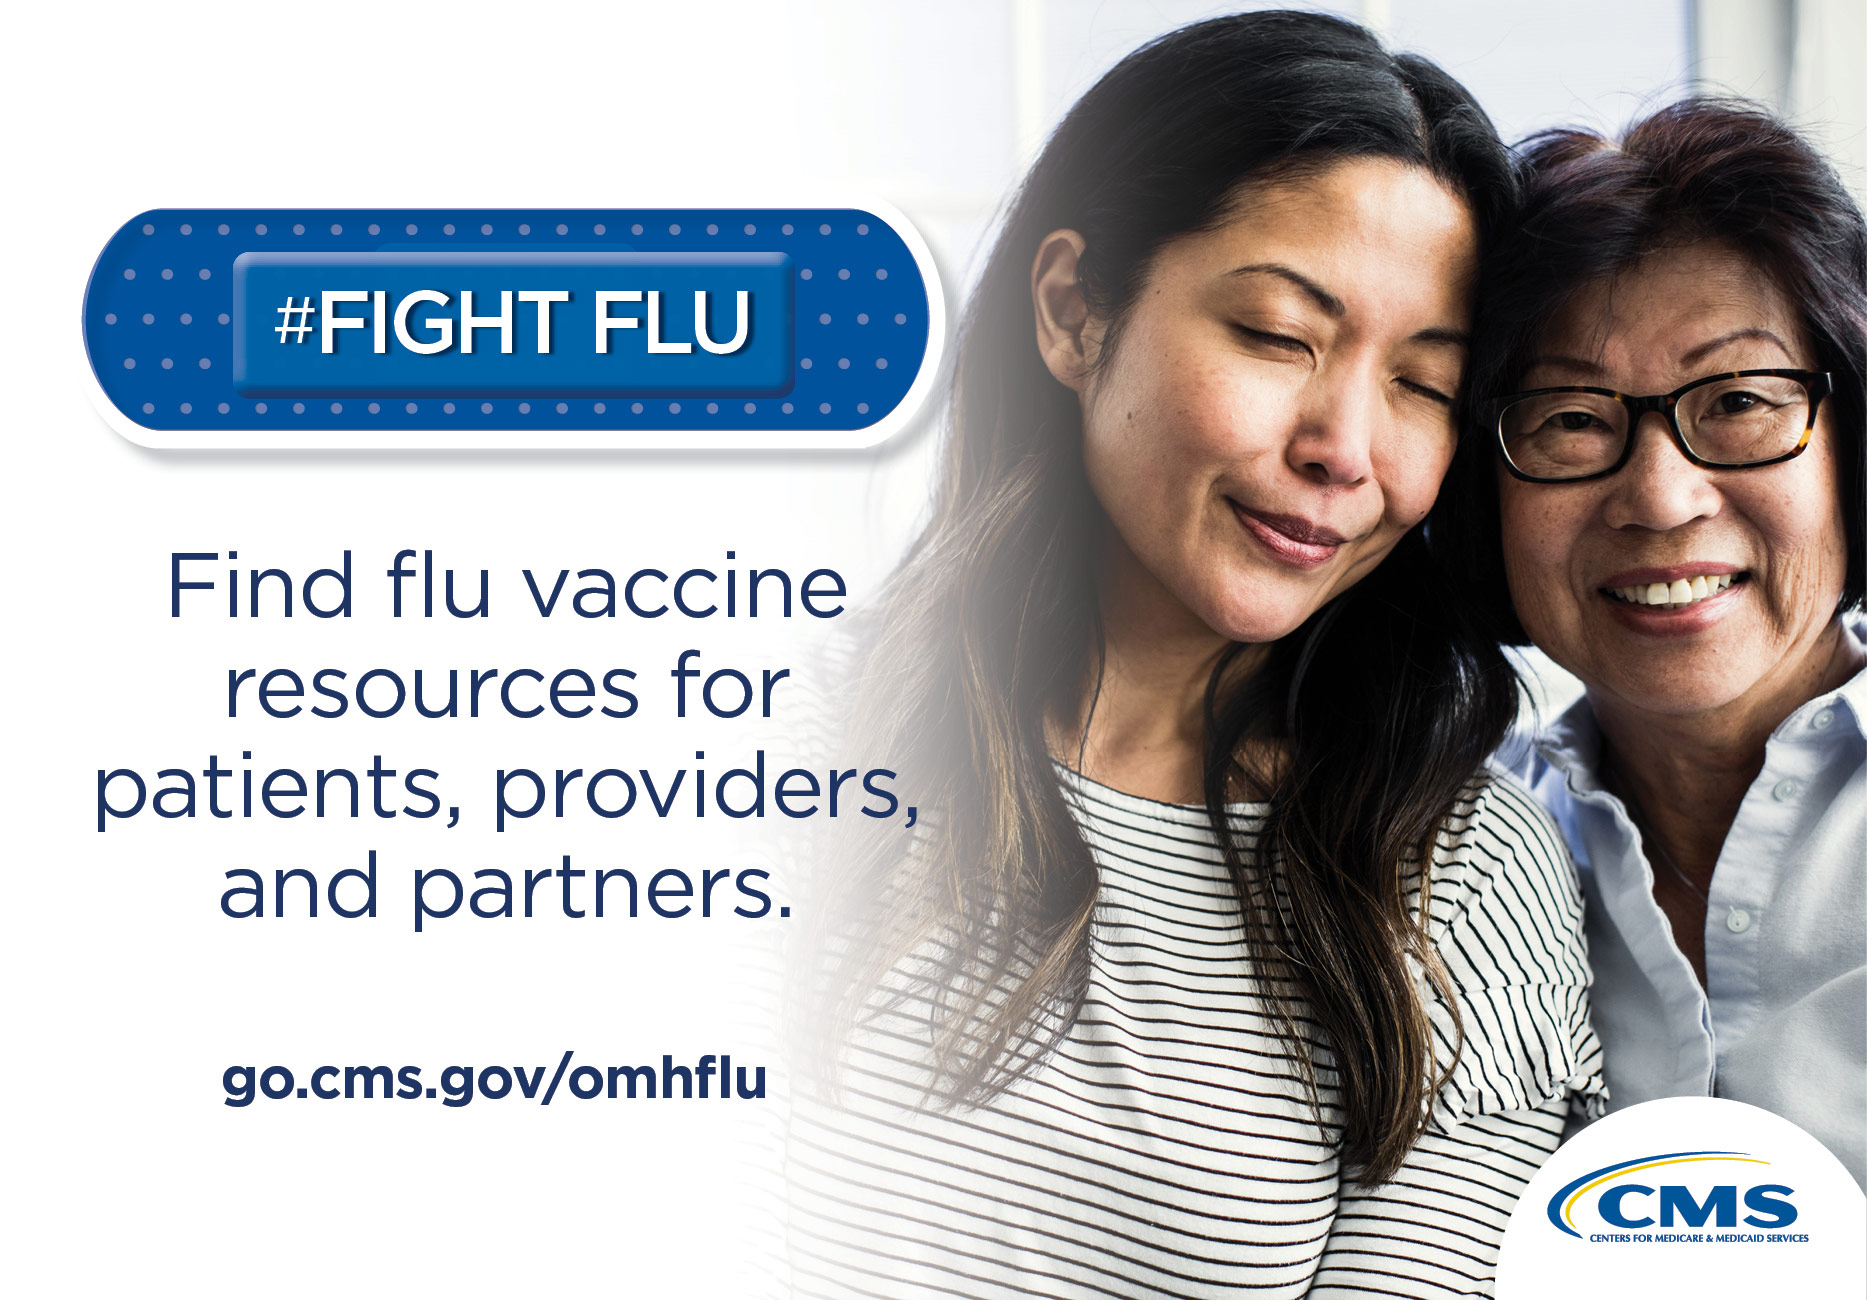  #Fight Flu.  Find flu vaccine resources for patients, providers, and partners.  go.cms.gov/omhflu